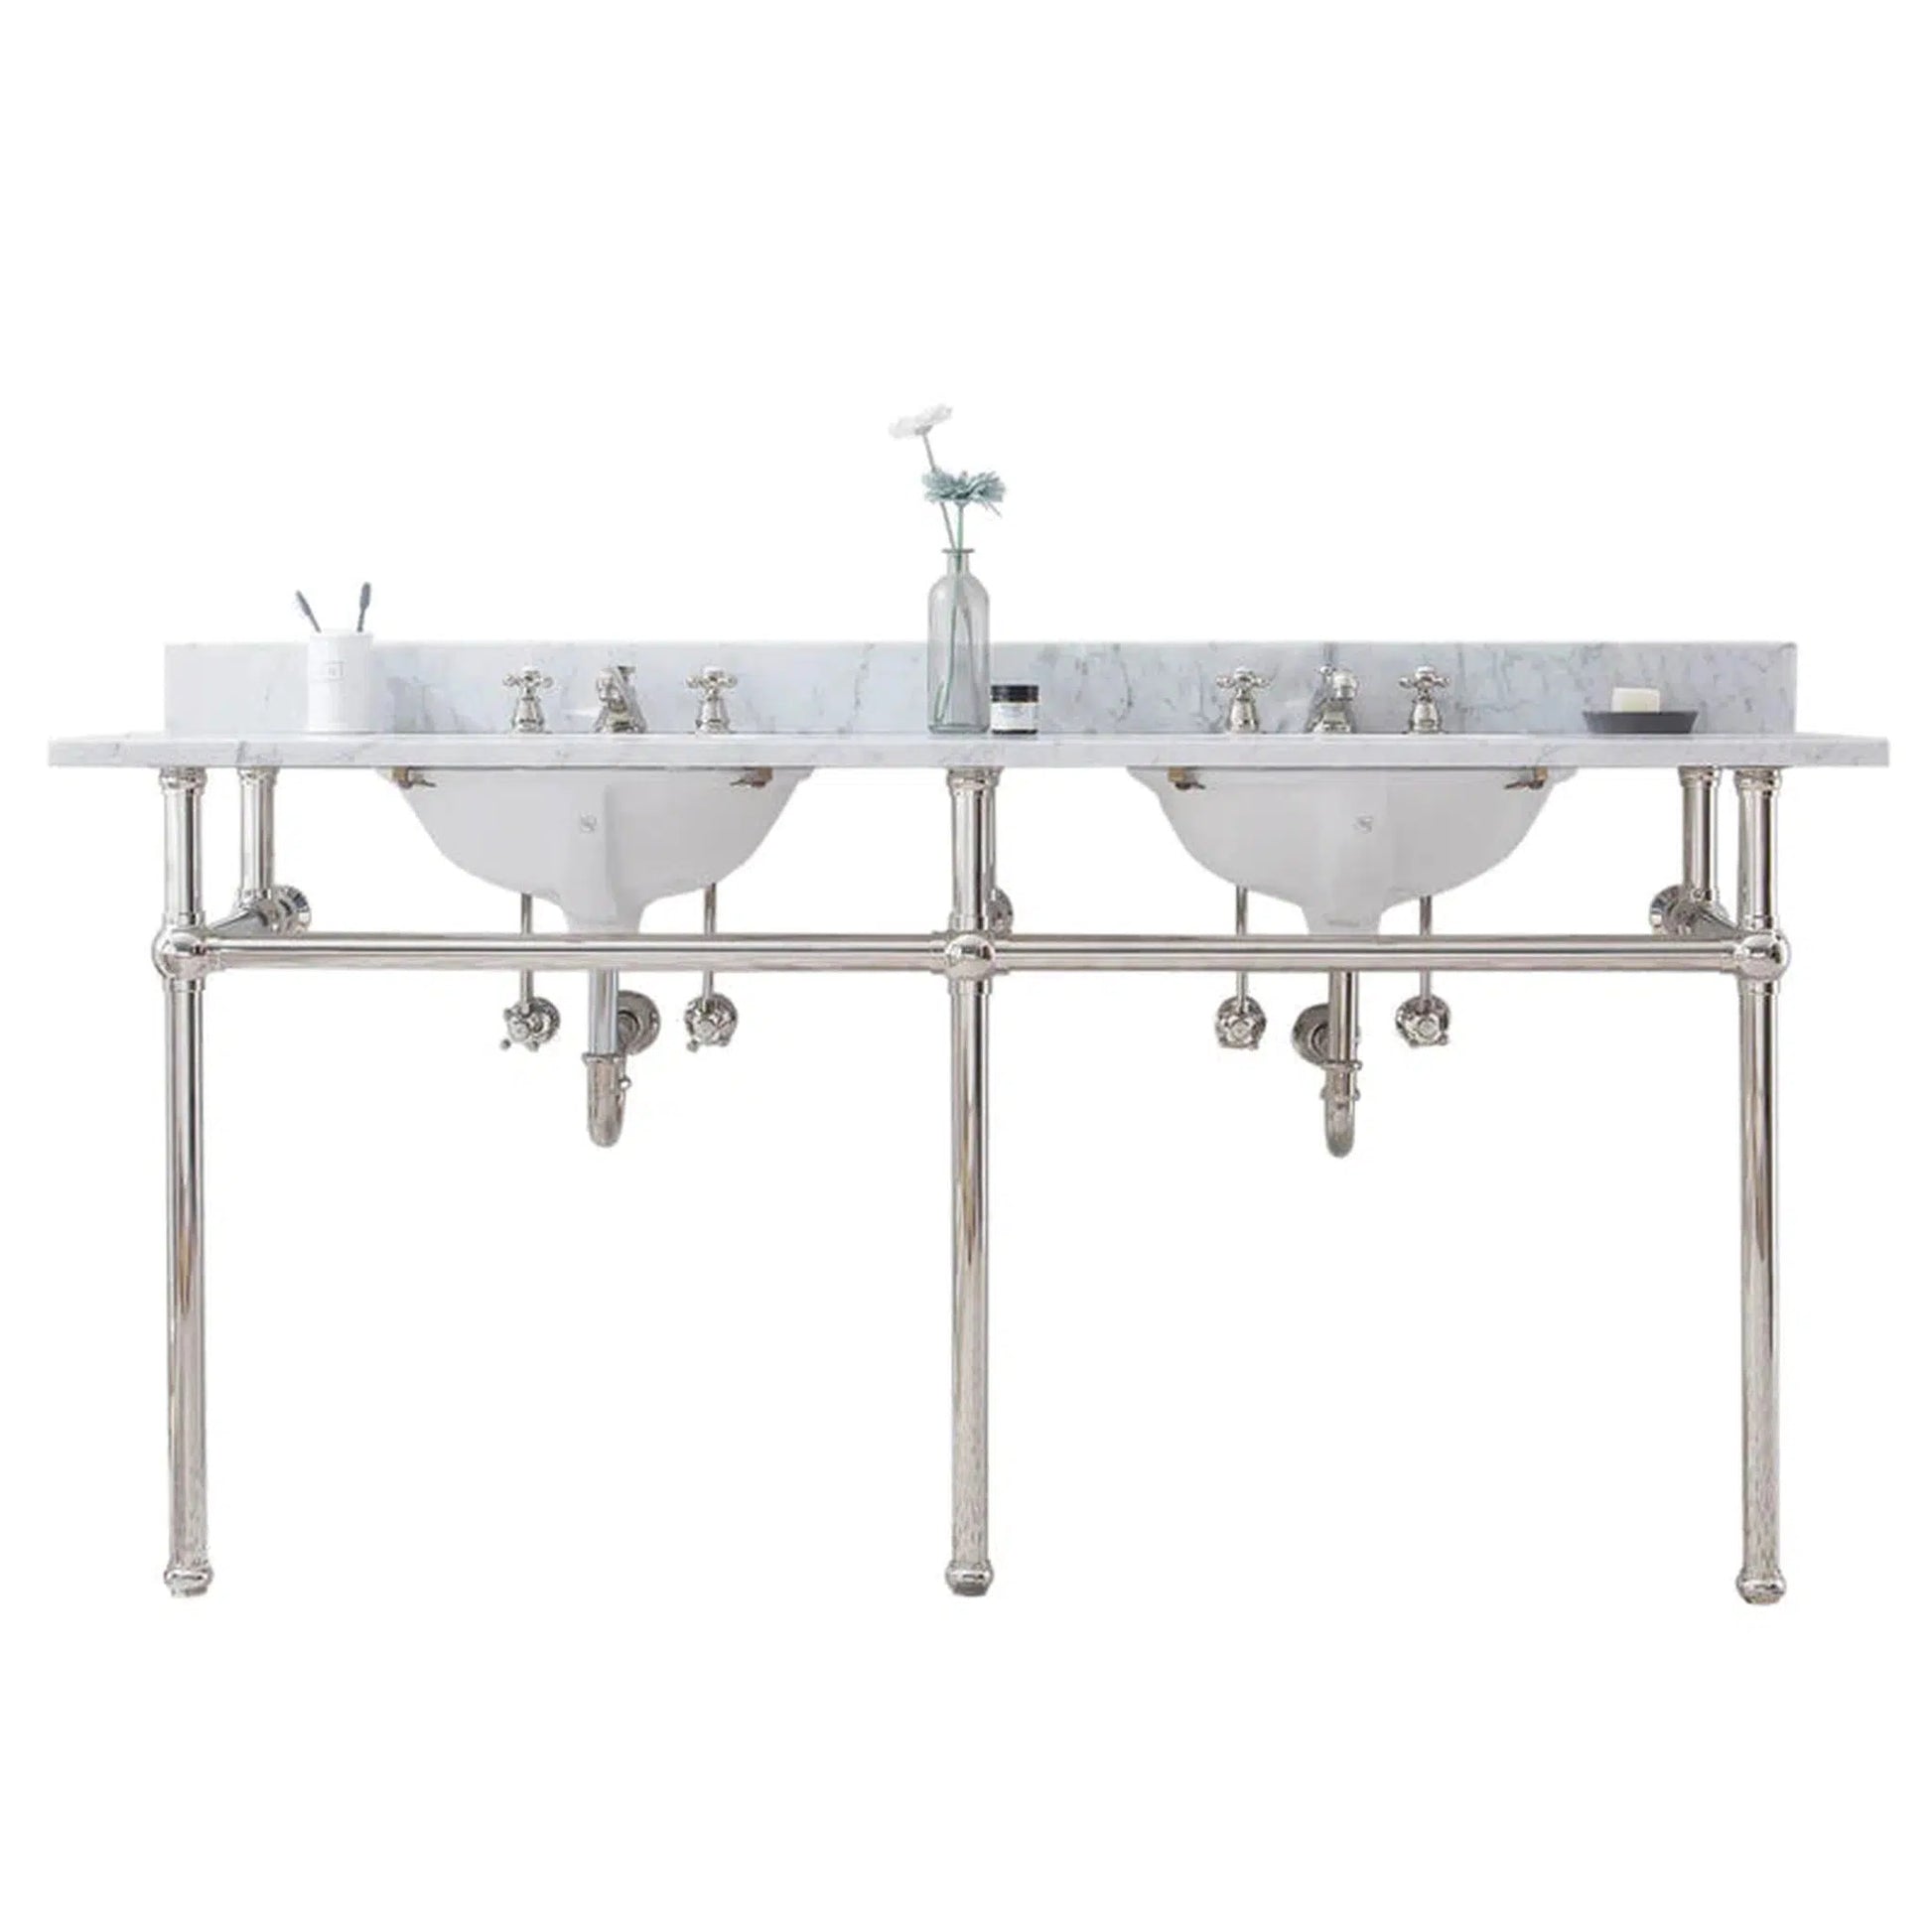 Water Creation Embassy 72 Inch Wide Double Wash Stand, P-Trap, and Counter Top with Basin included in Polished Nickel (PVD) Finish